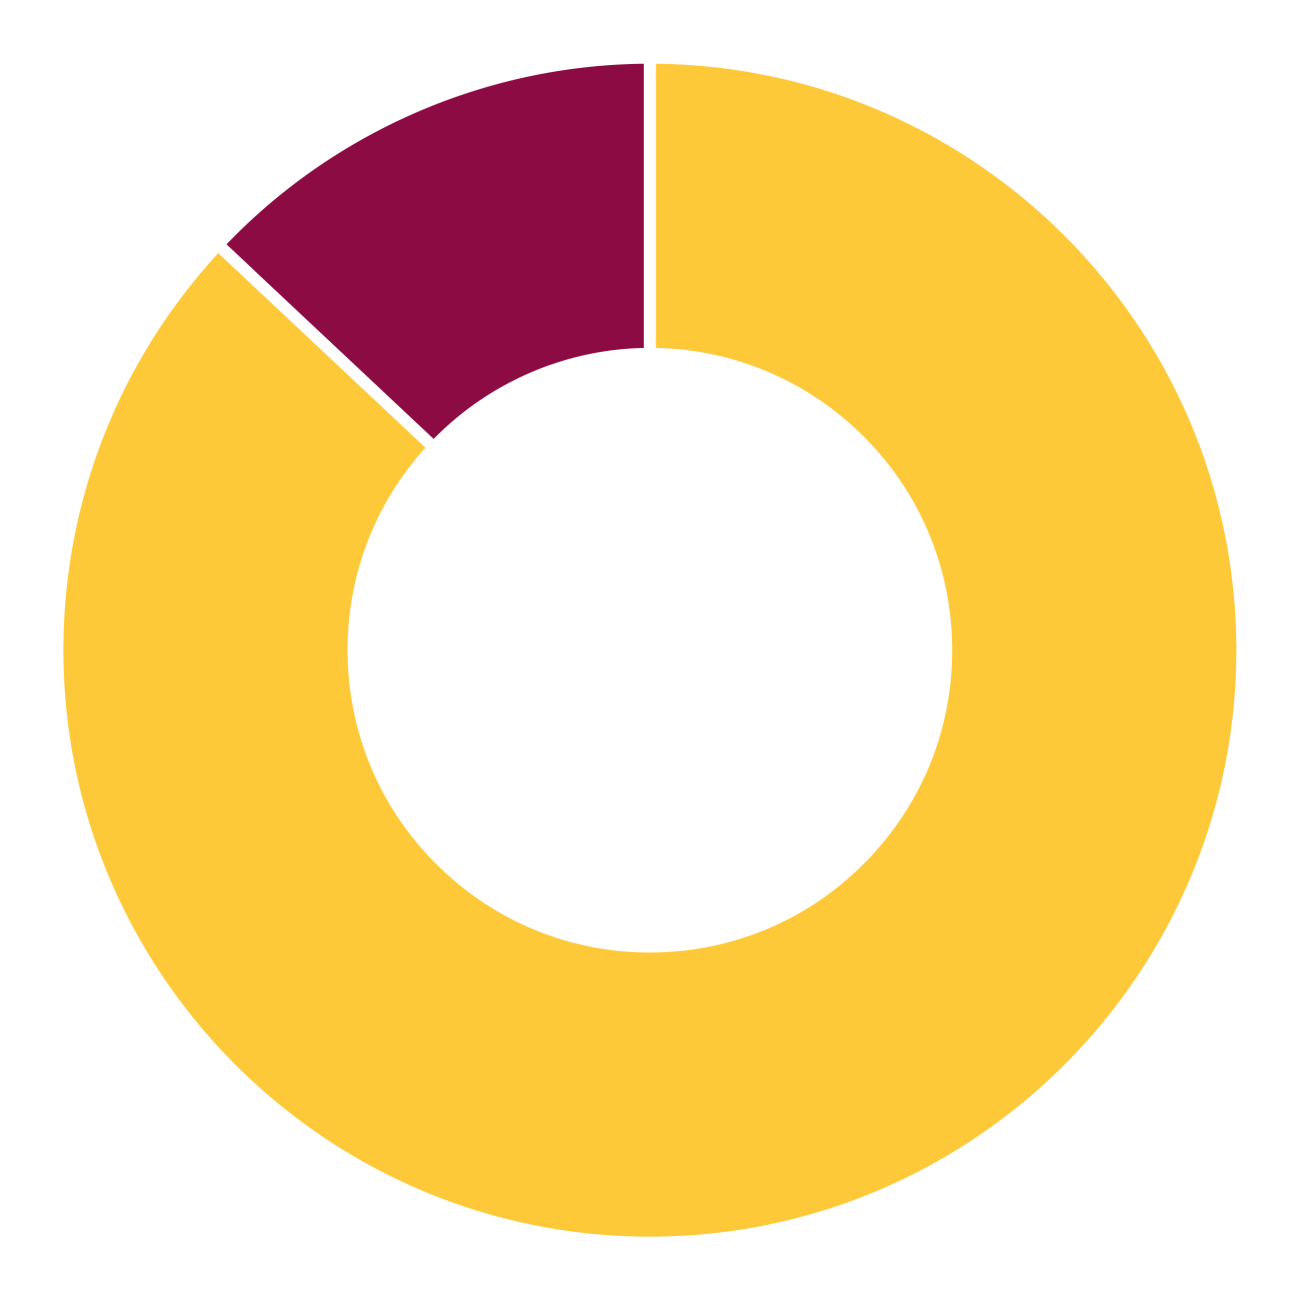 Maroon and gold pie chart showing 87%.